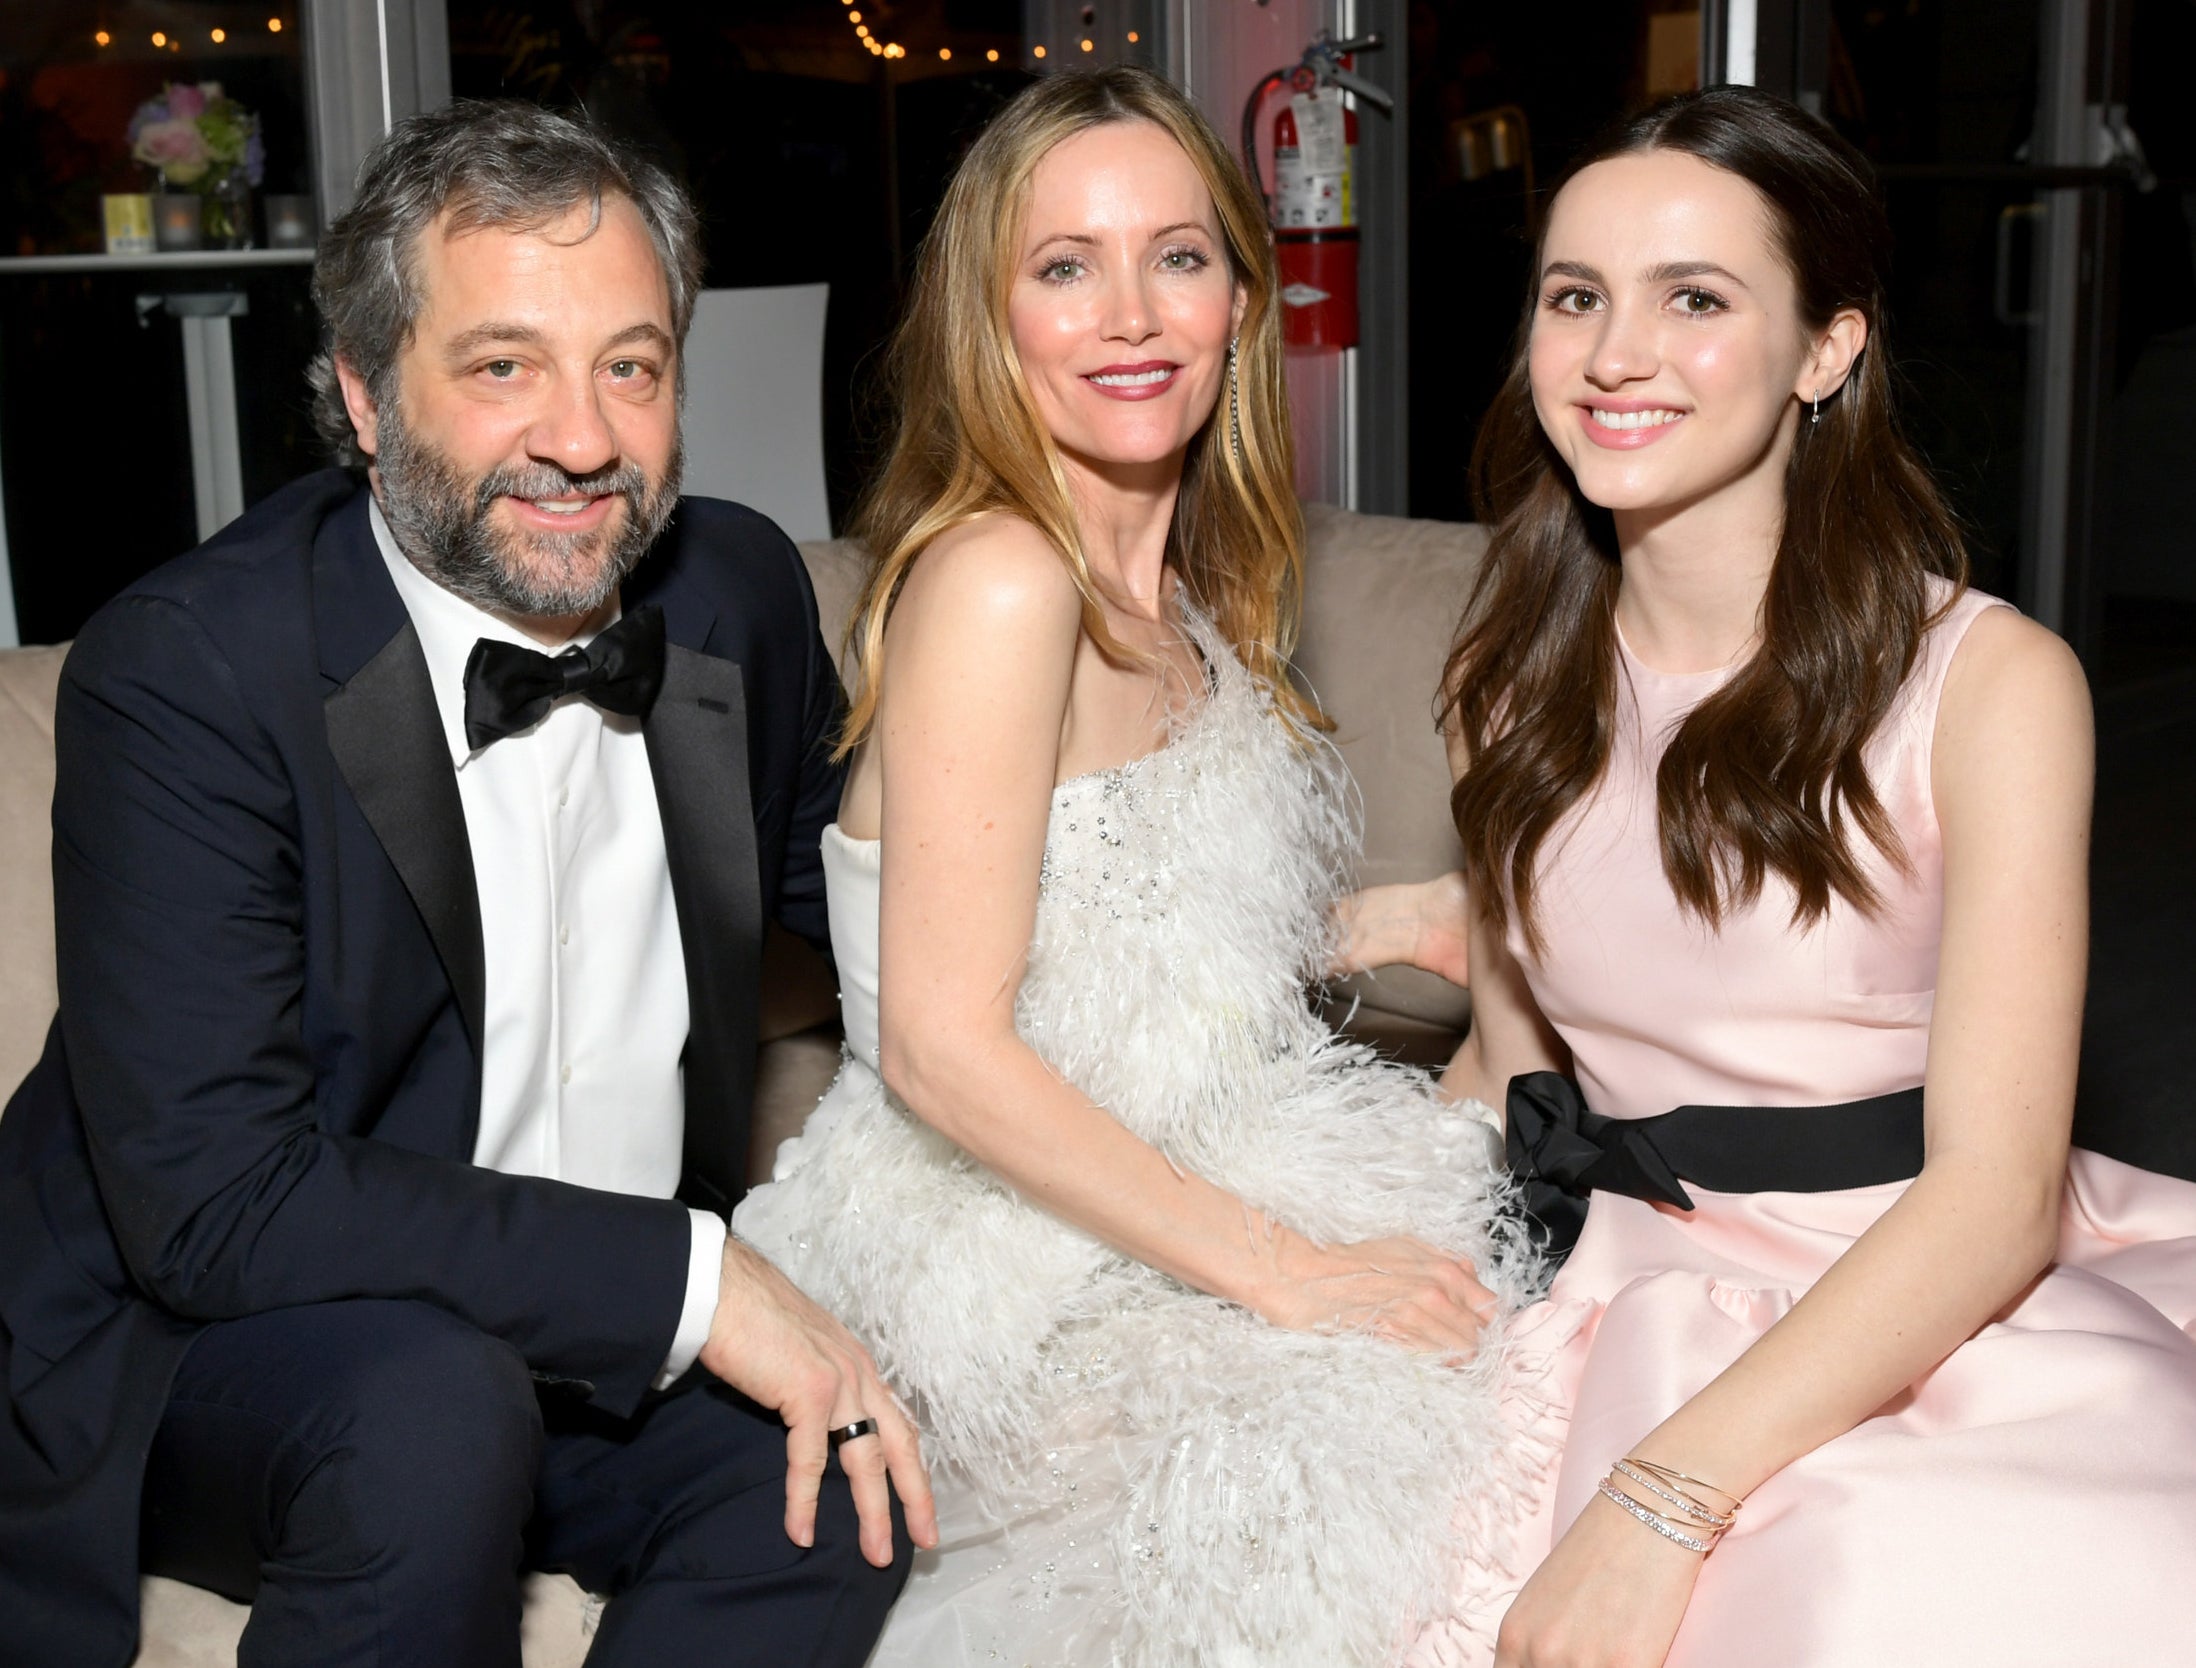 Judd Apatow, Leslie Mann, and Maude Apatow attend the 2019 Vanity Fair Oscar Party